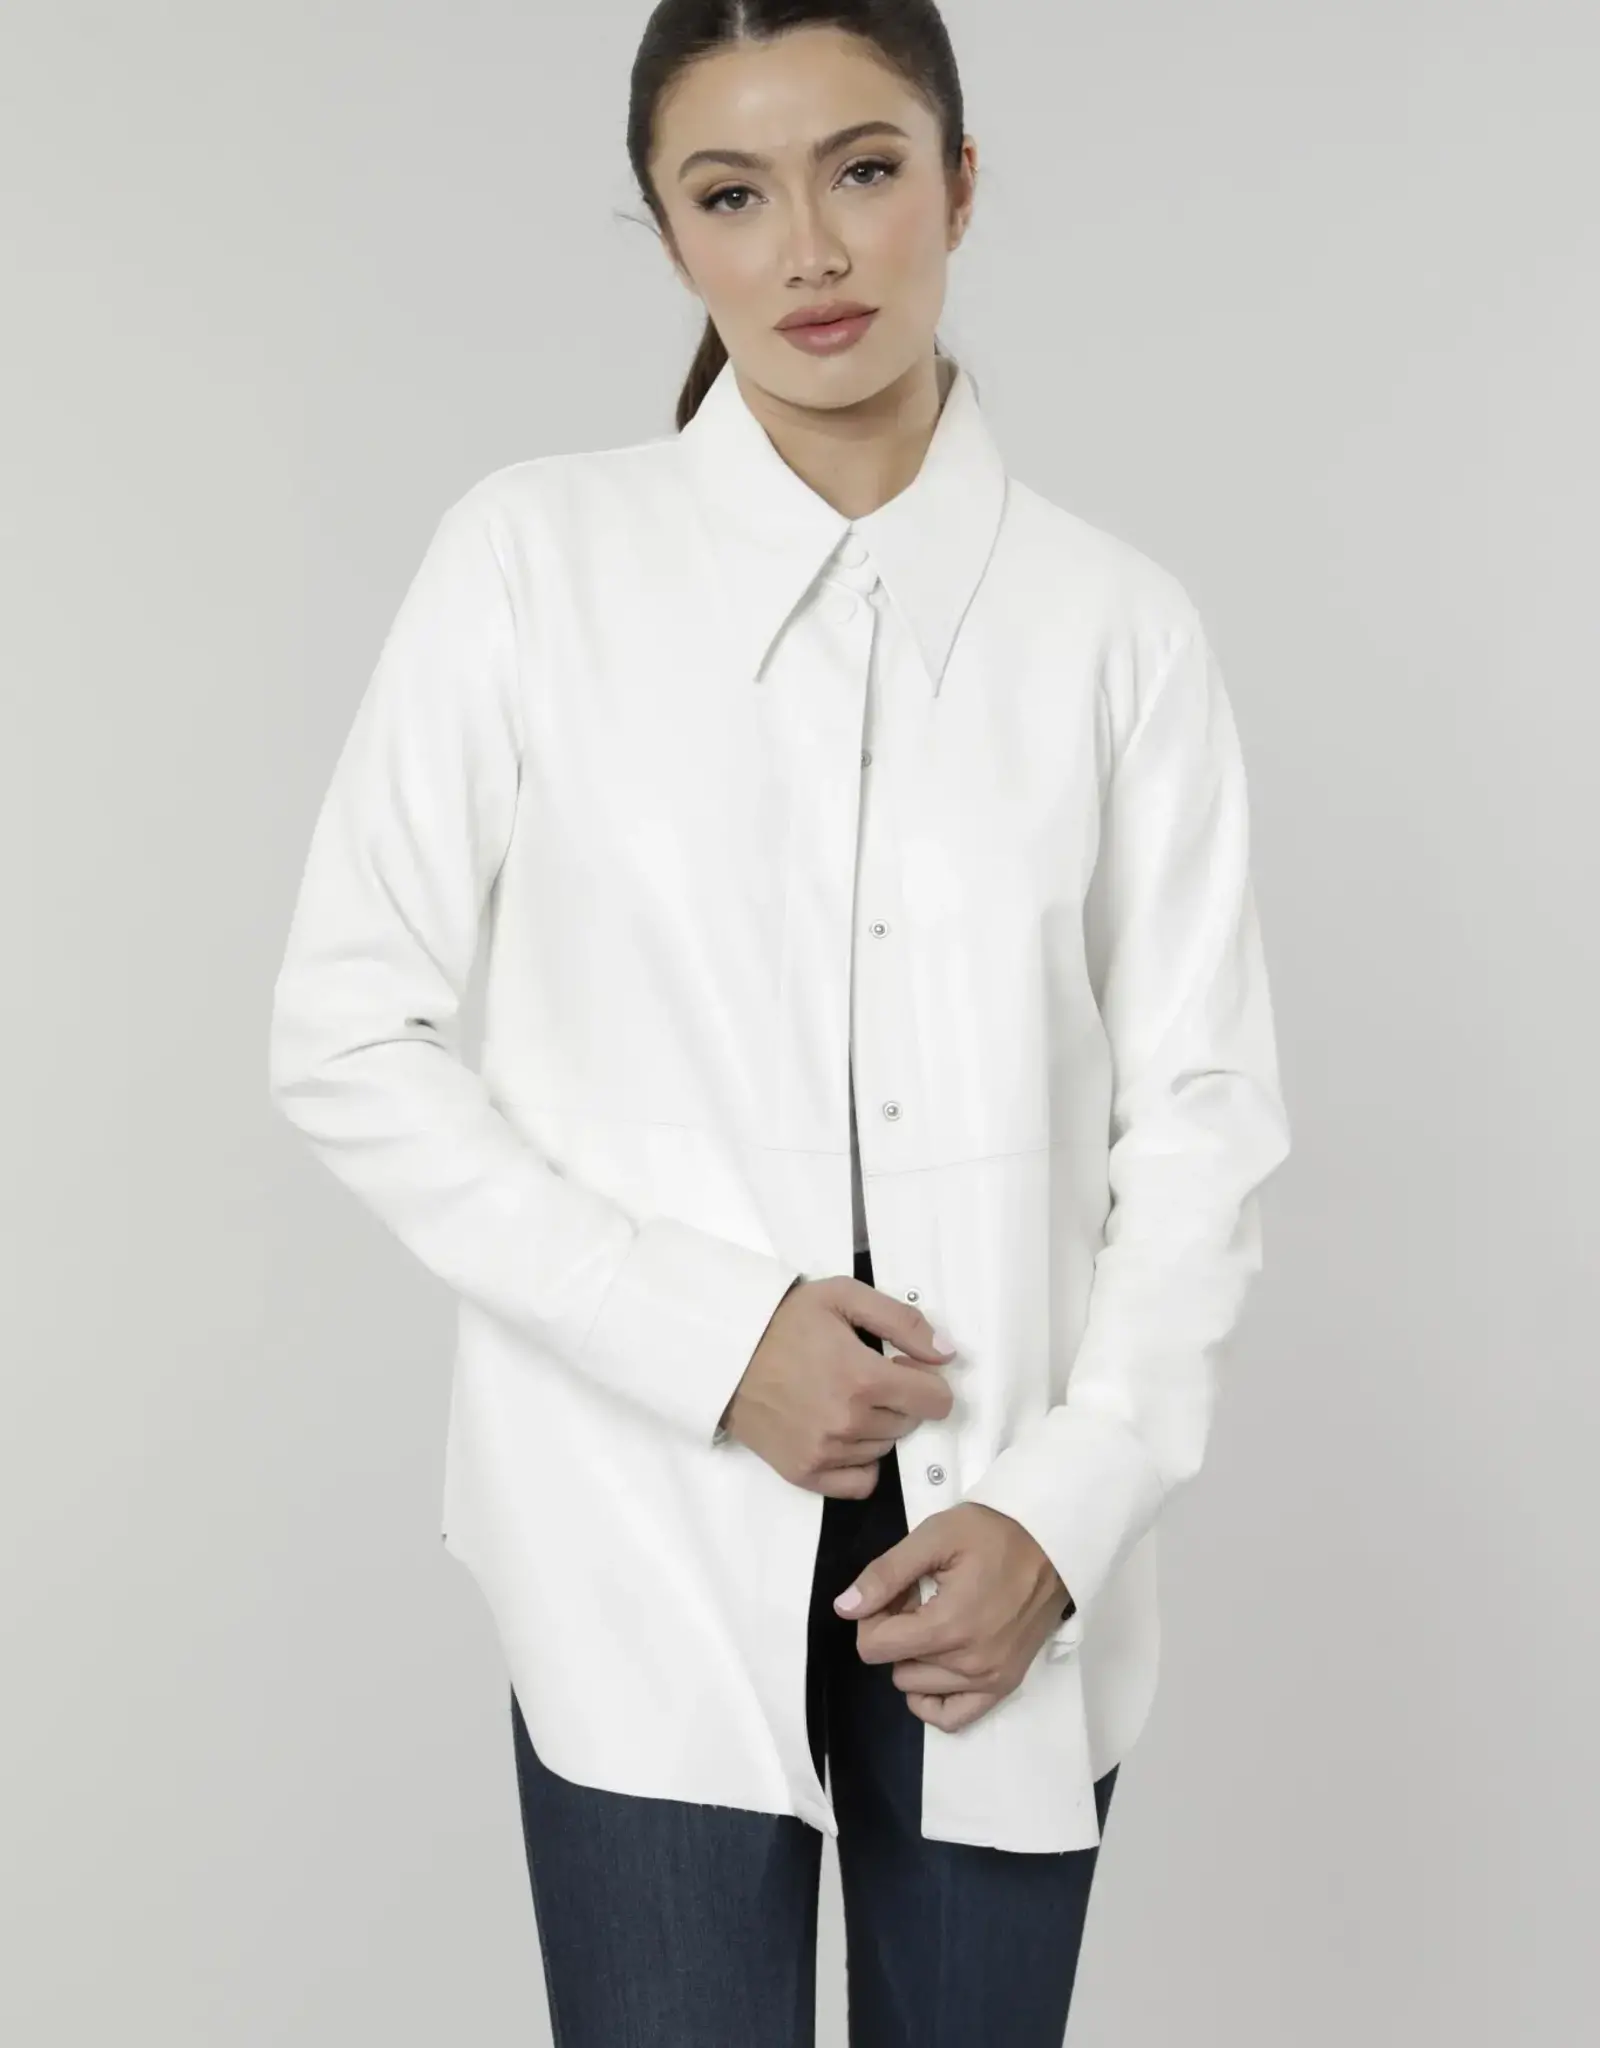 Dolce Cabo Dolce Cabo Vegan Leather Shirt White